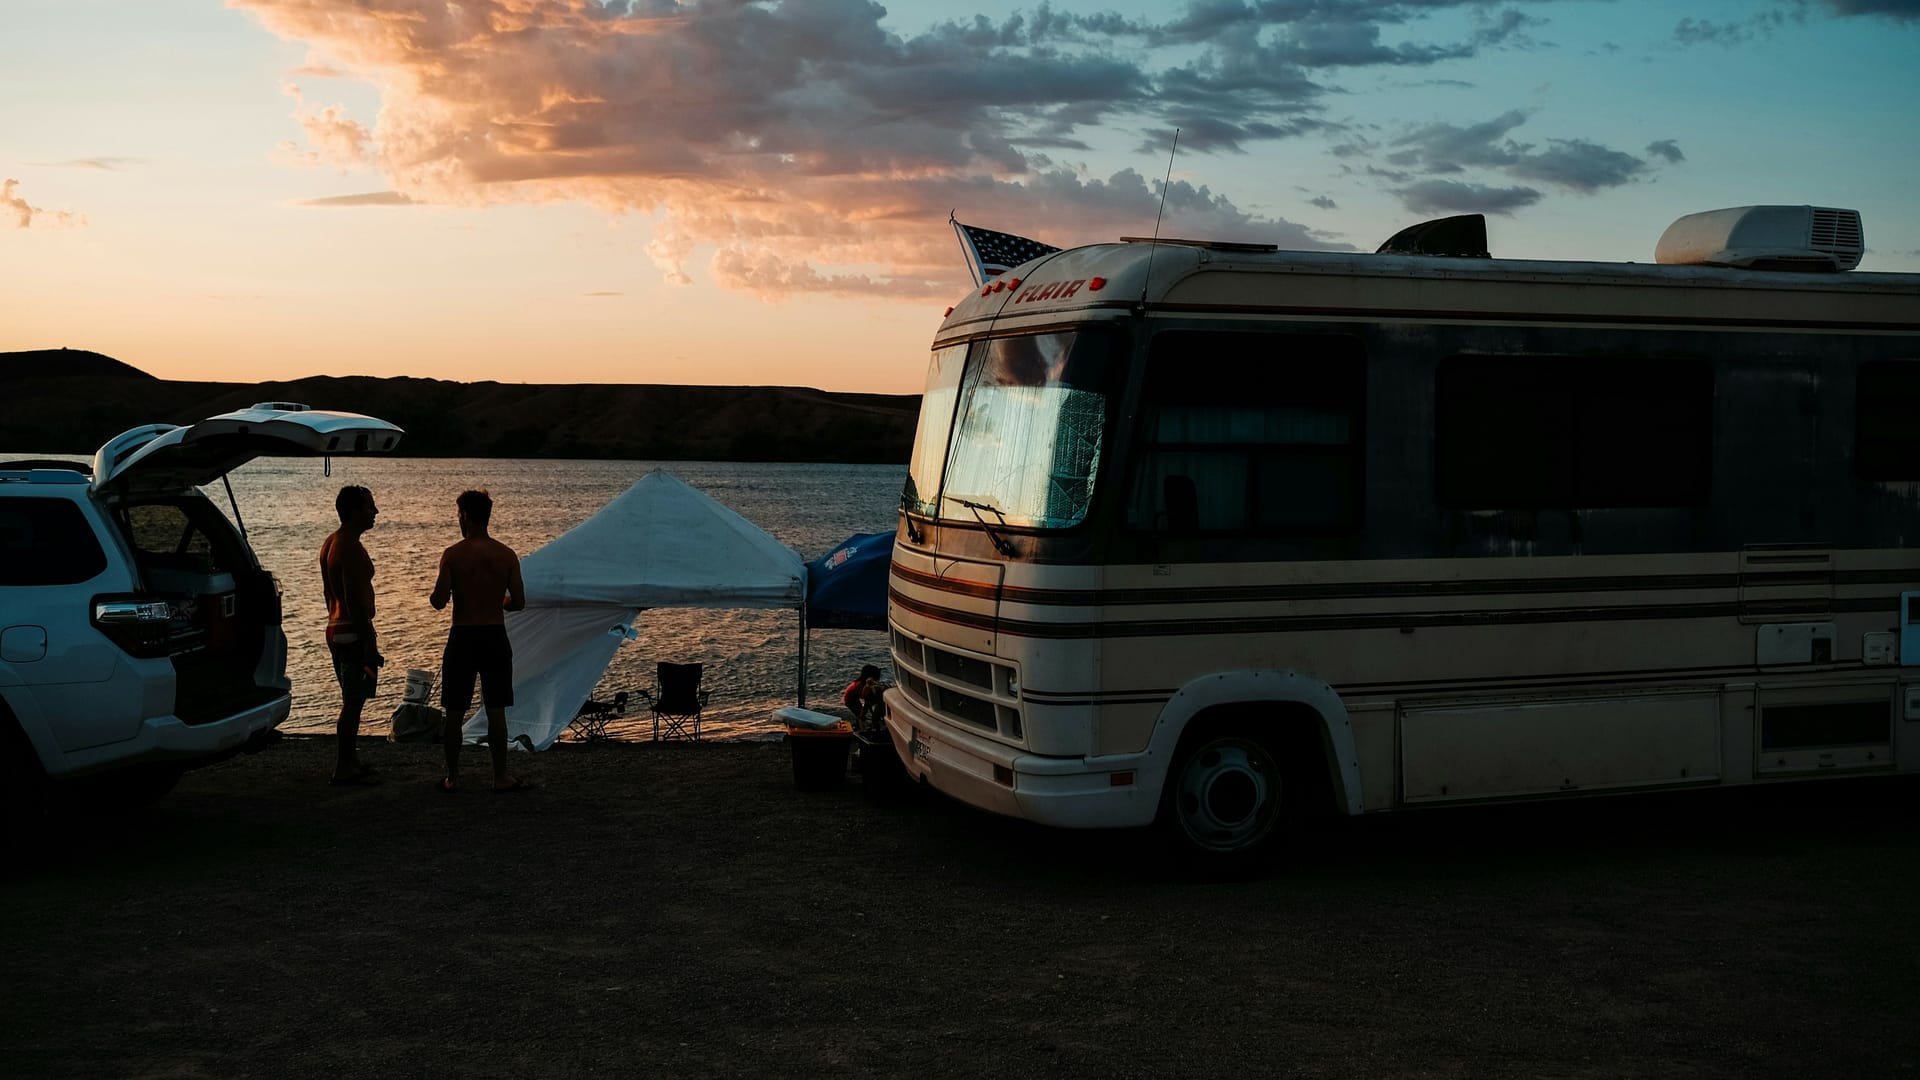 Two men standing beside a classic RV motorhome by a lake not long after sunset, by tents and camping chairs. Photo by Leon Bublitz.